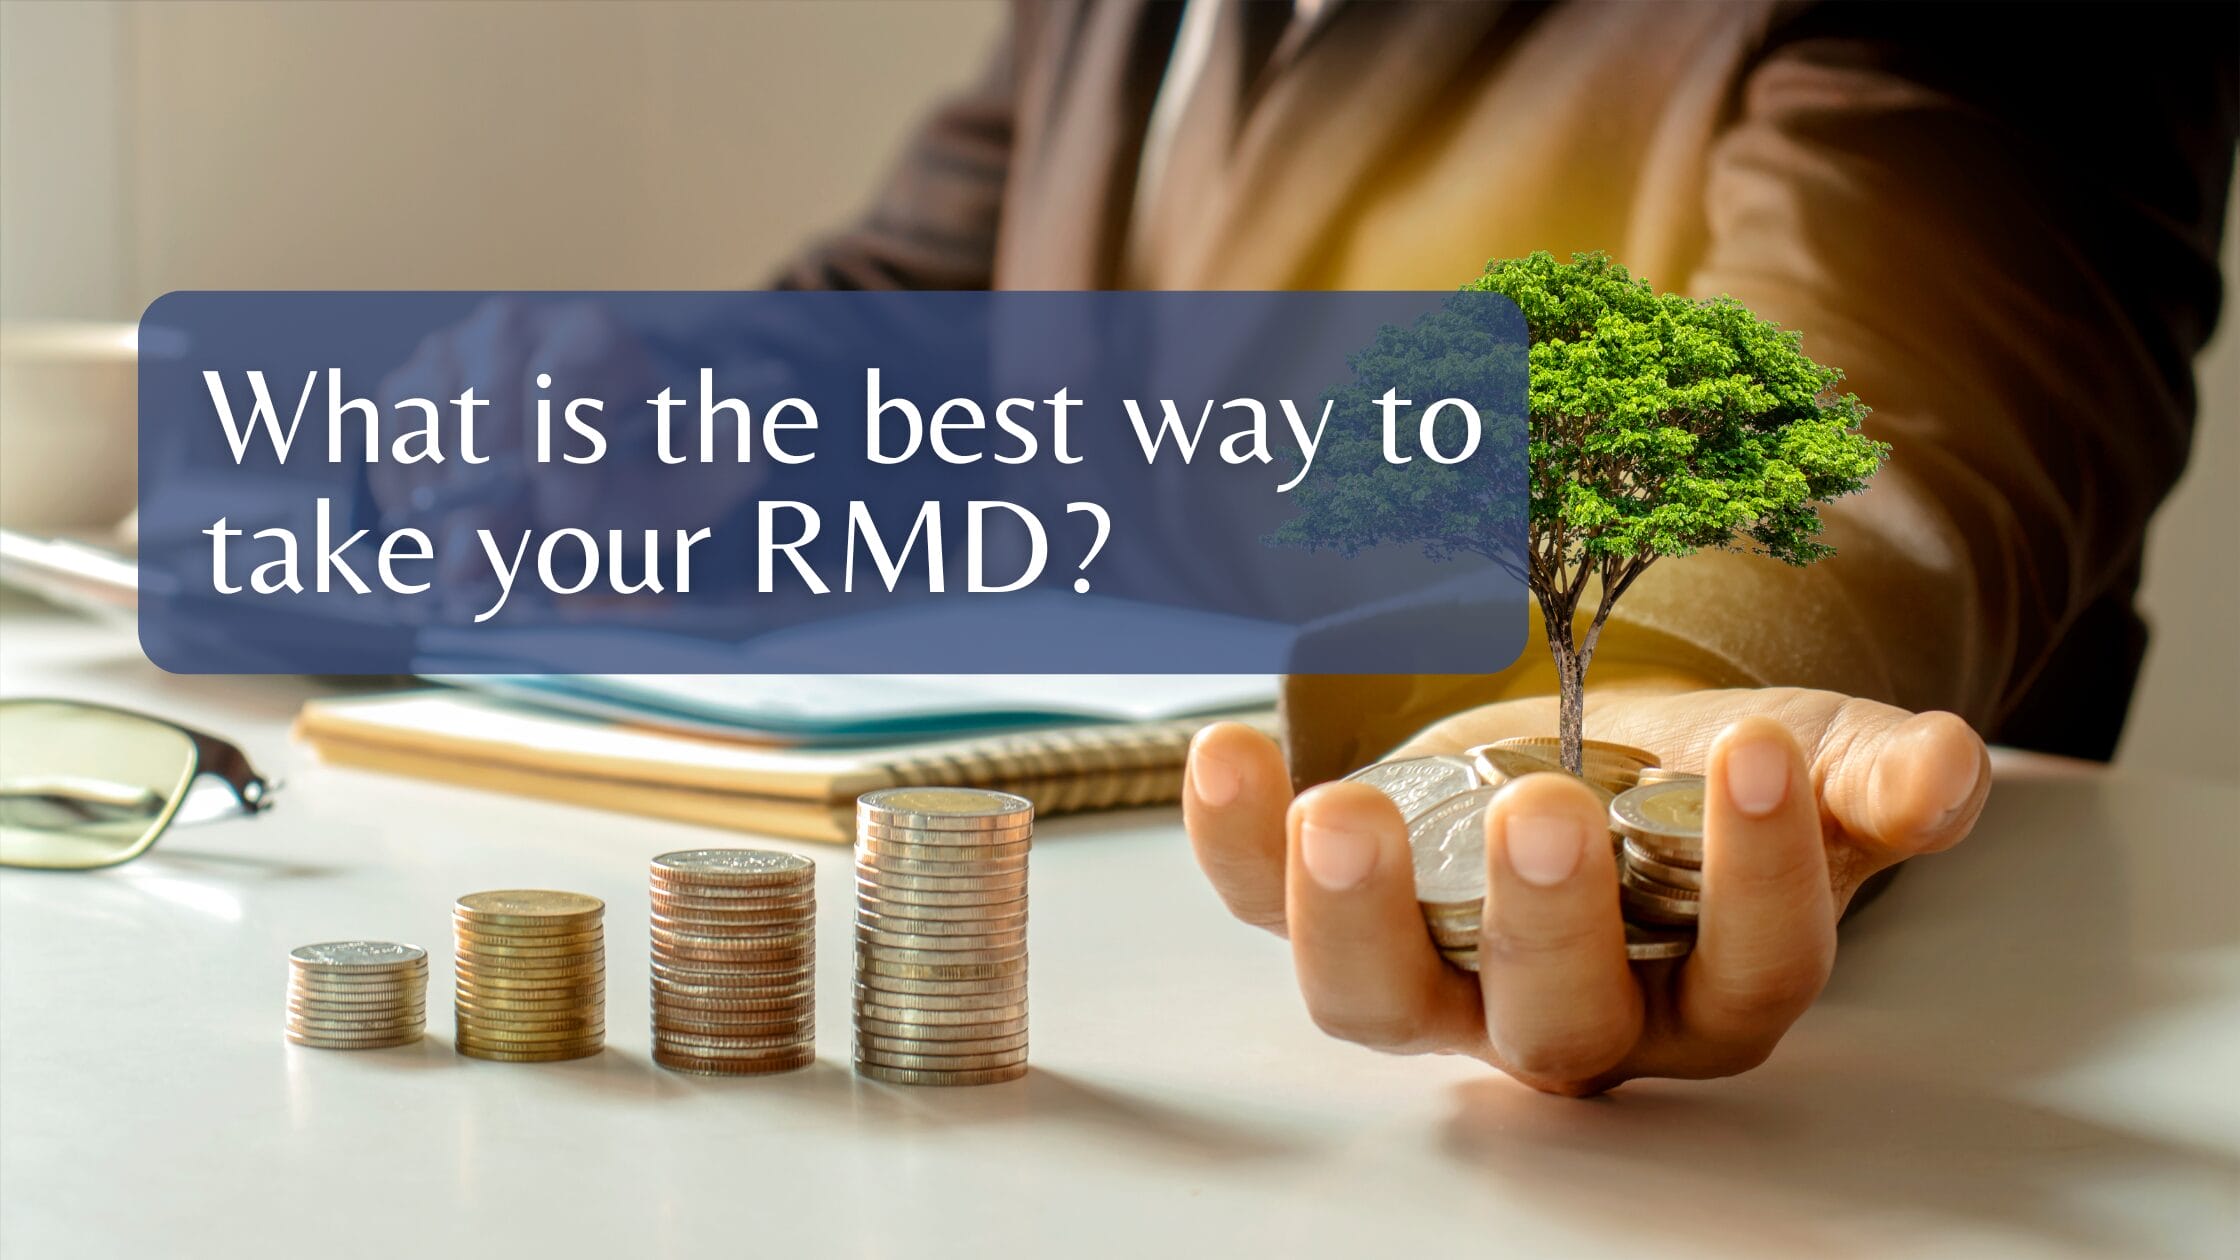 What is the best way to take your RMD?